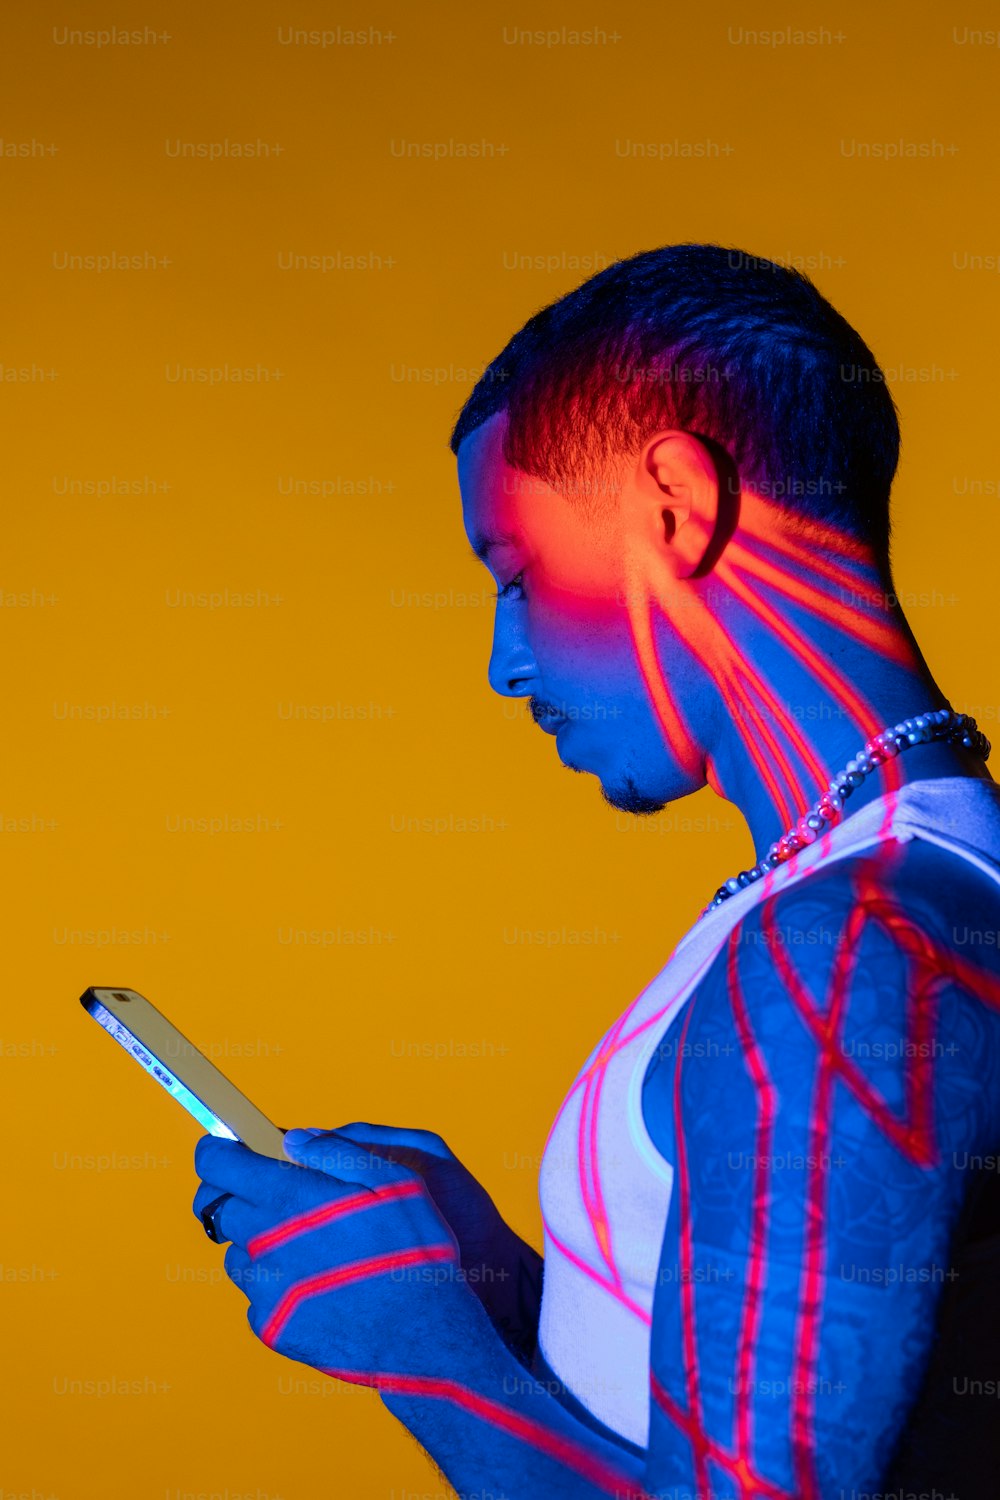 a person with a neon body paint holding a cell phone